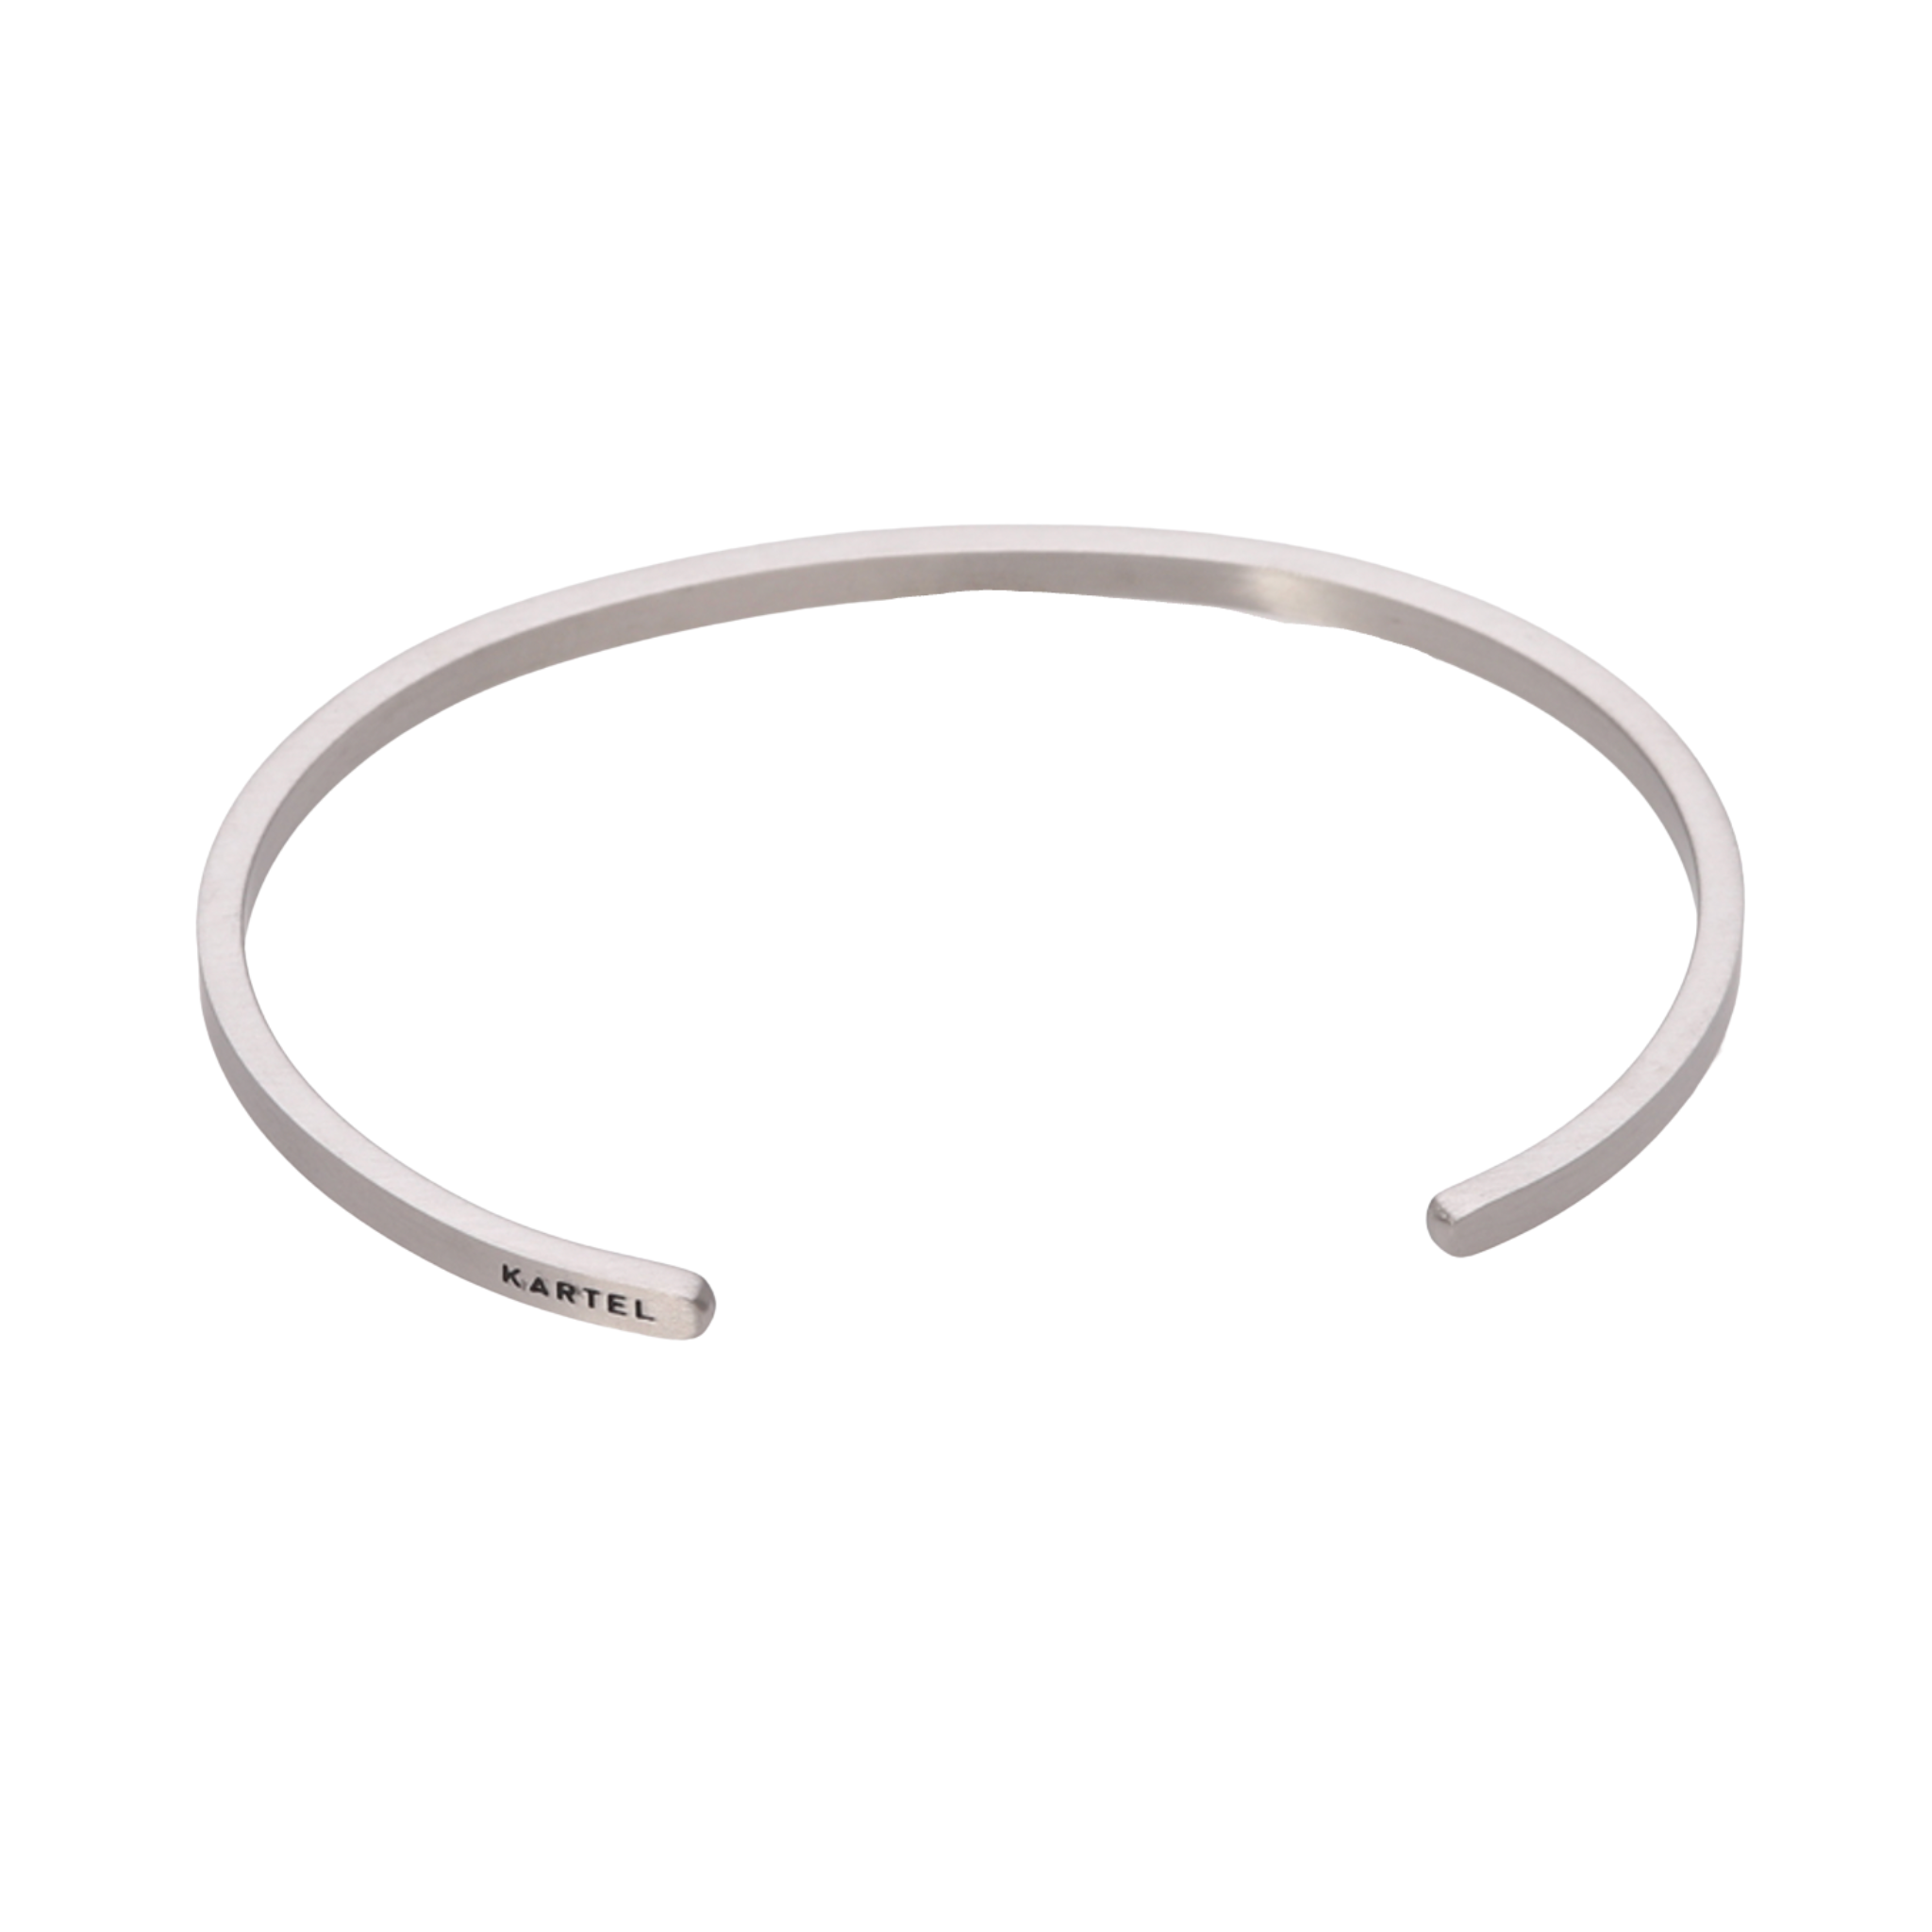 Brushed Stainless Steel Cuff - 4 Sizes